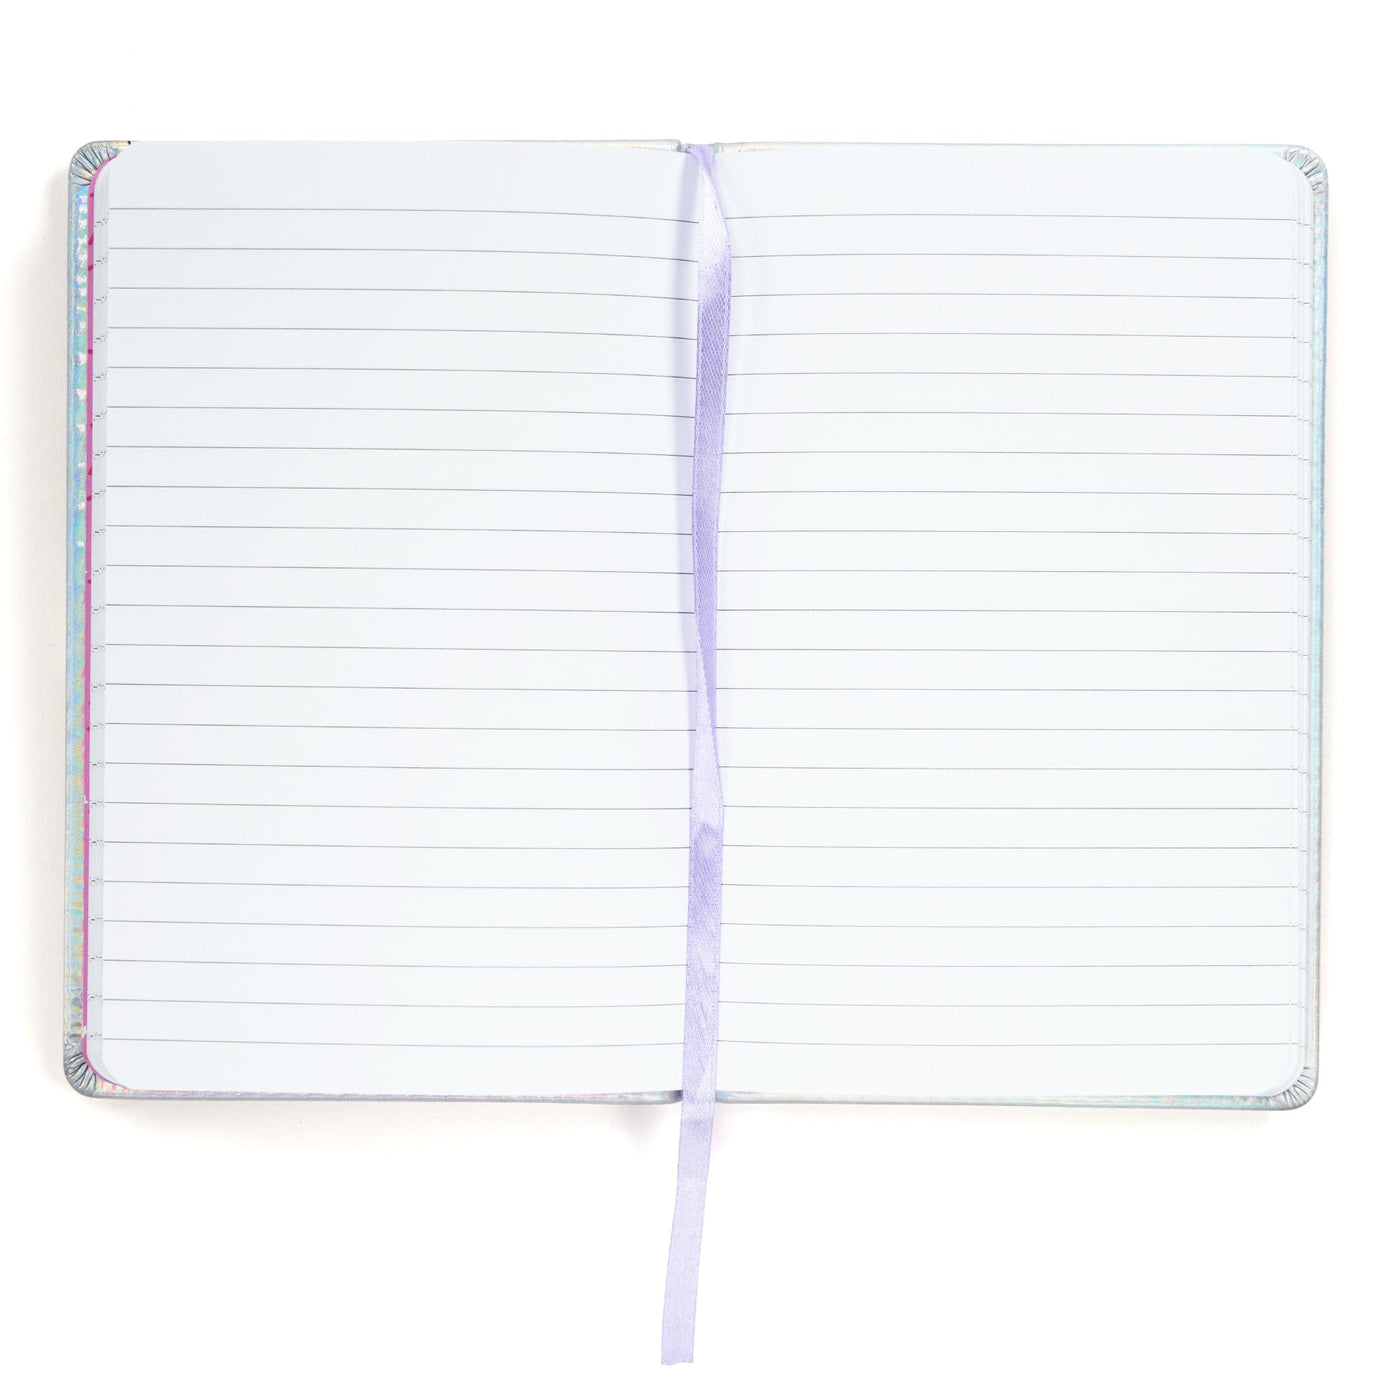 Inside of open holographic journal showing college rule lined paper and lavender ribbon bookmark